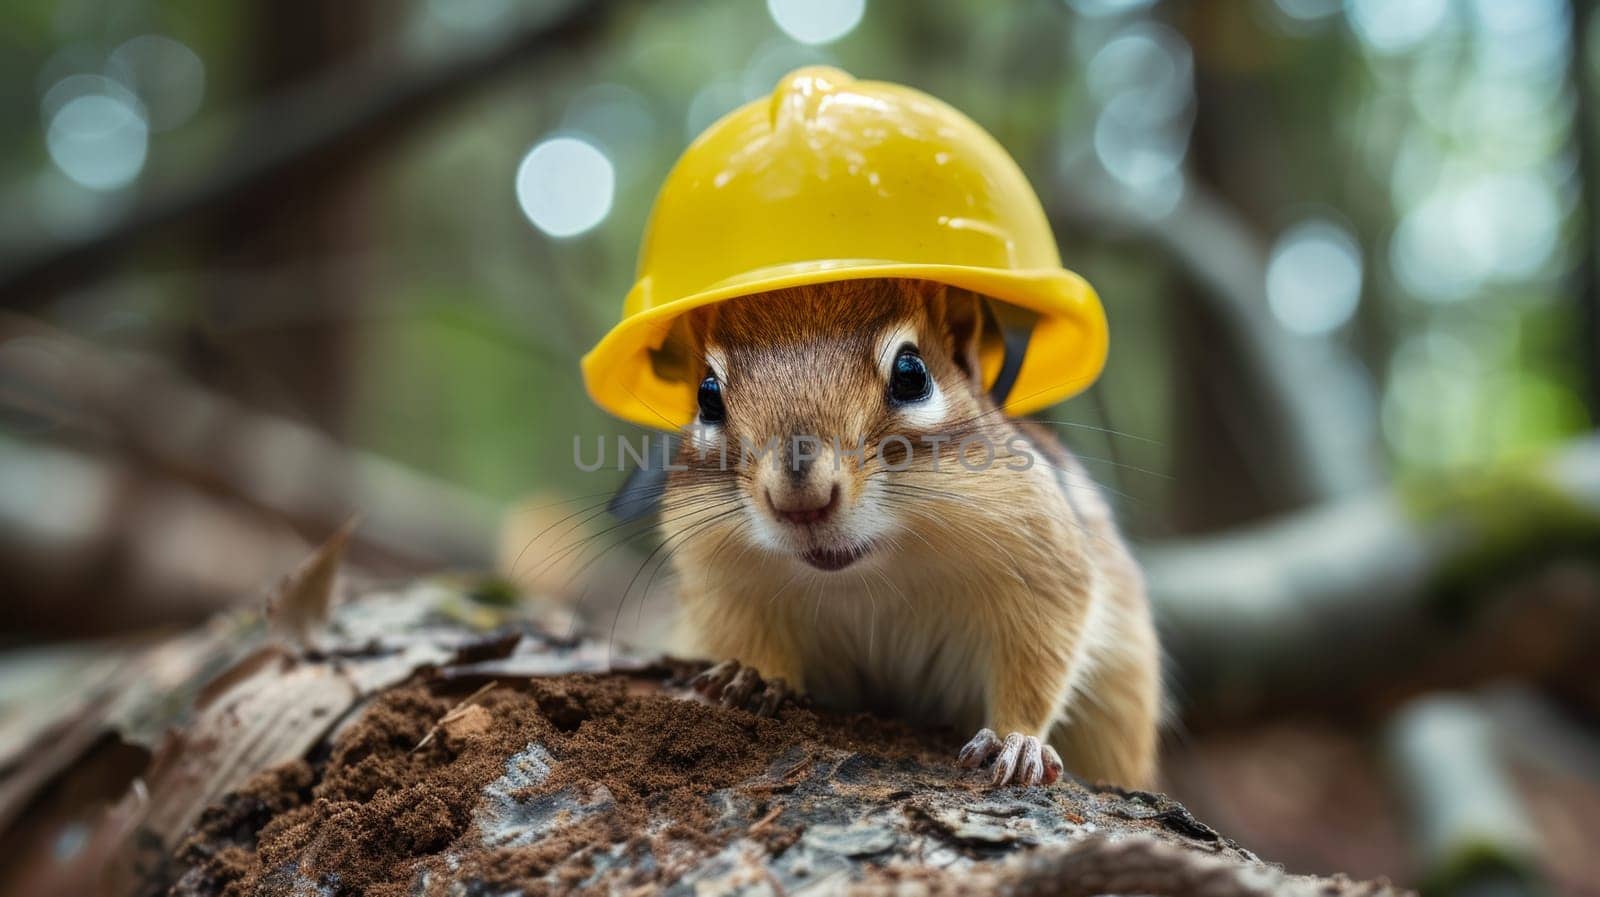 A squirrel wearing a yellow hard hat on top of some logs